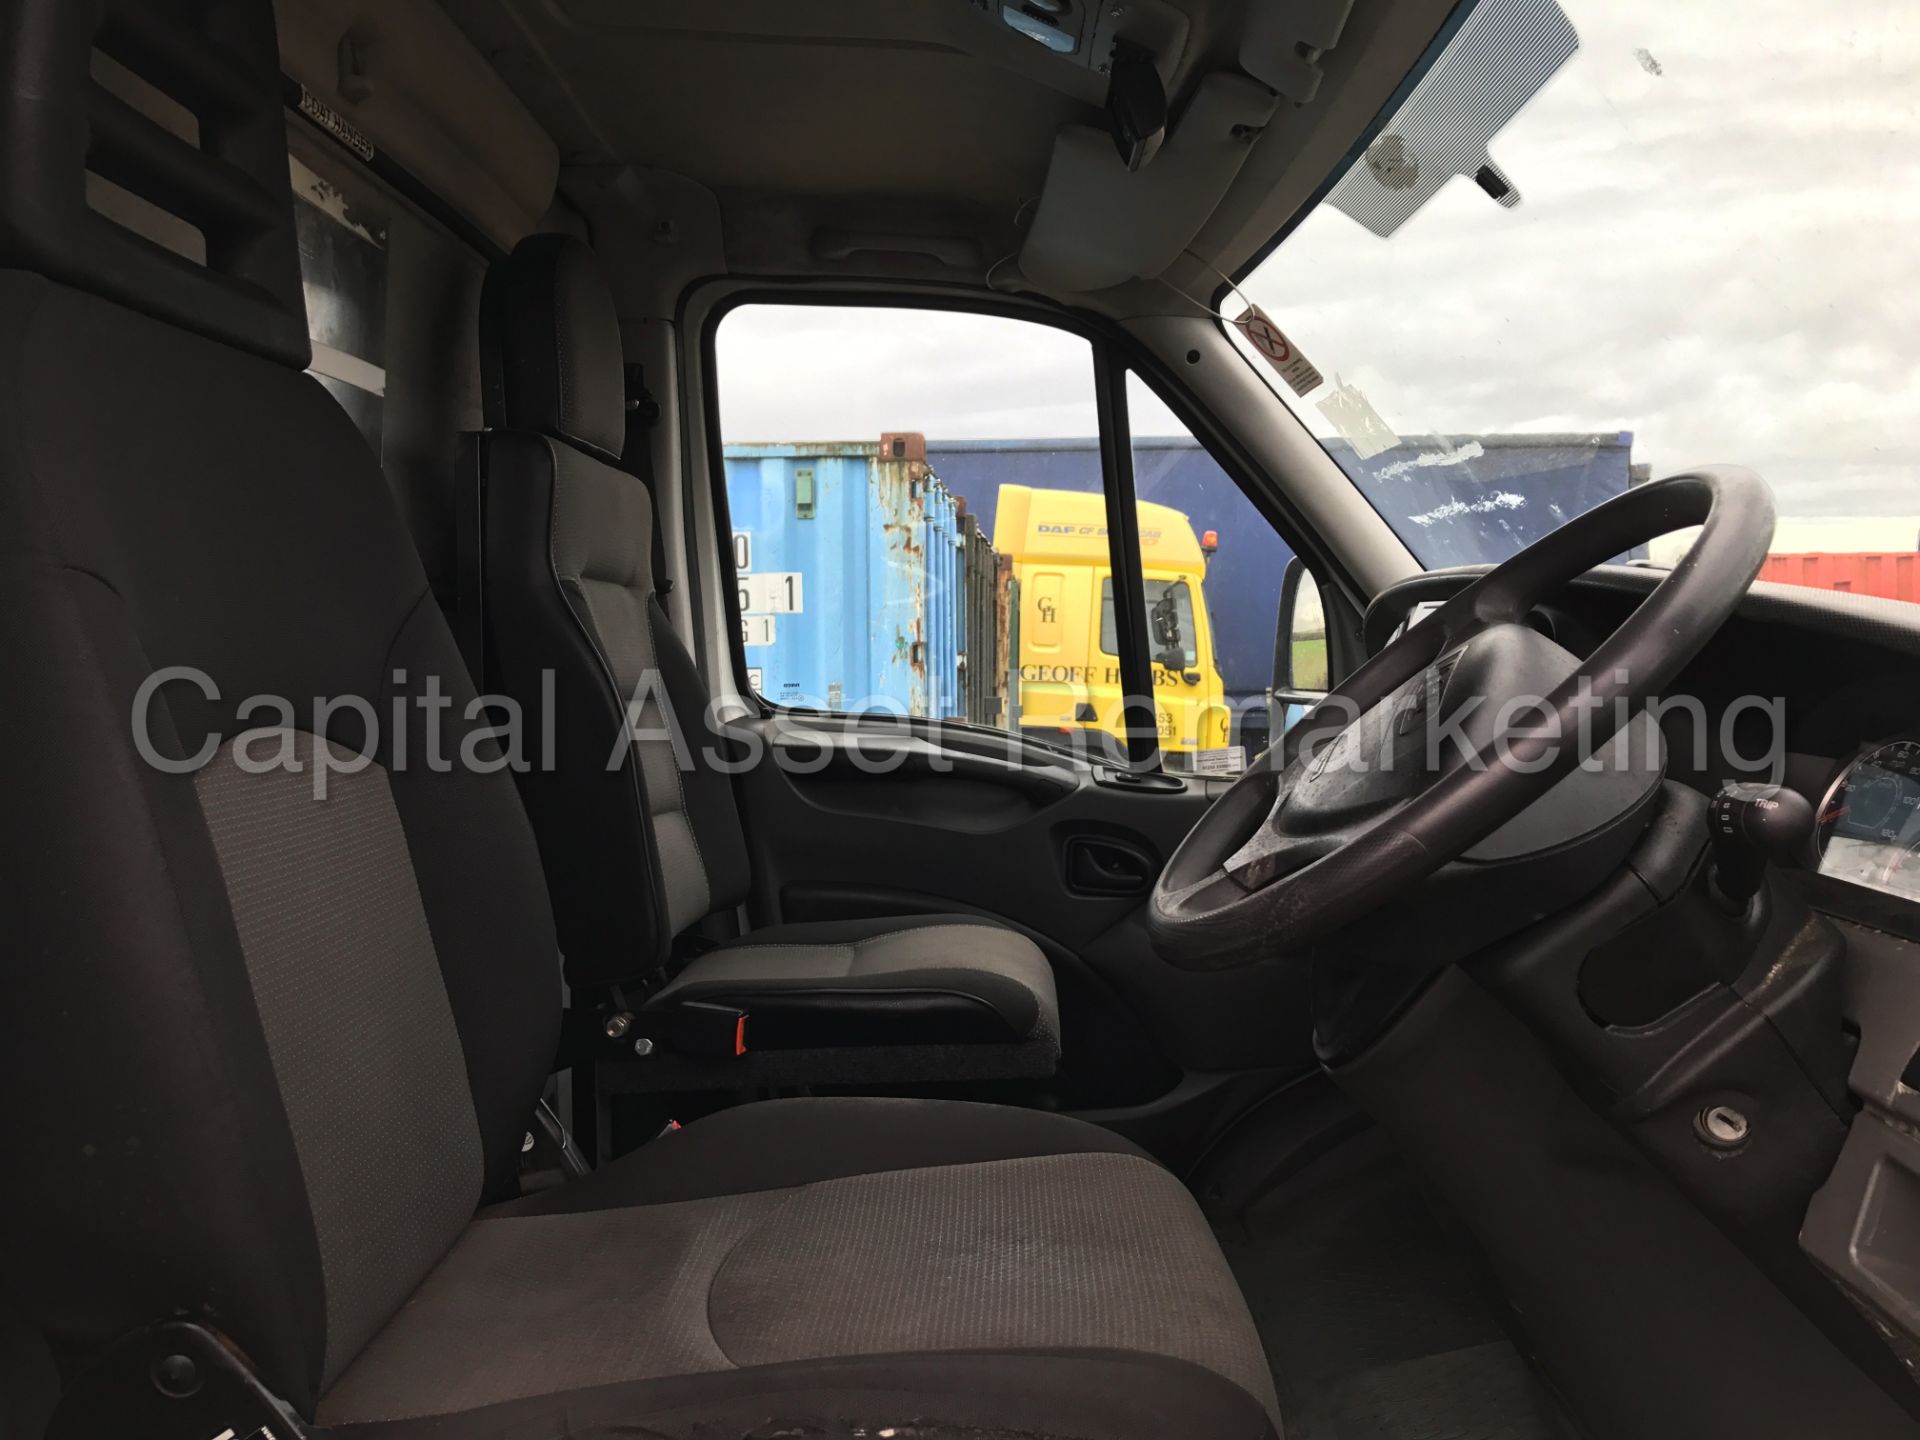 (On Sale) IVECO DAILY 35S11 '16 FT RECOVERY TRUCK' (2012 MODEL) *BRAND NEW BODY* (1 OWNER FROM NEW) - Image 8 of 10